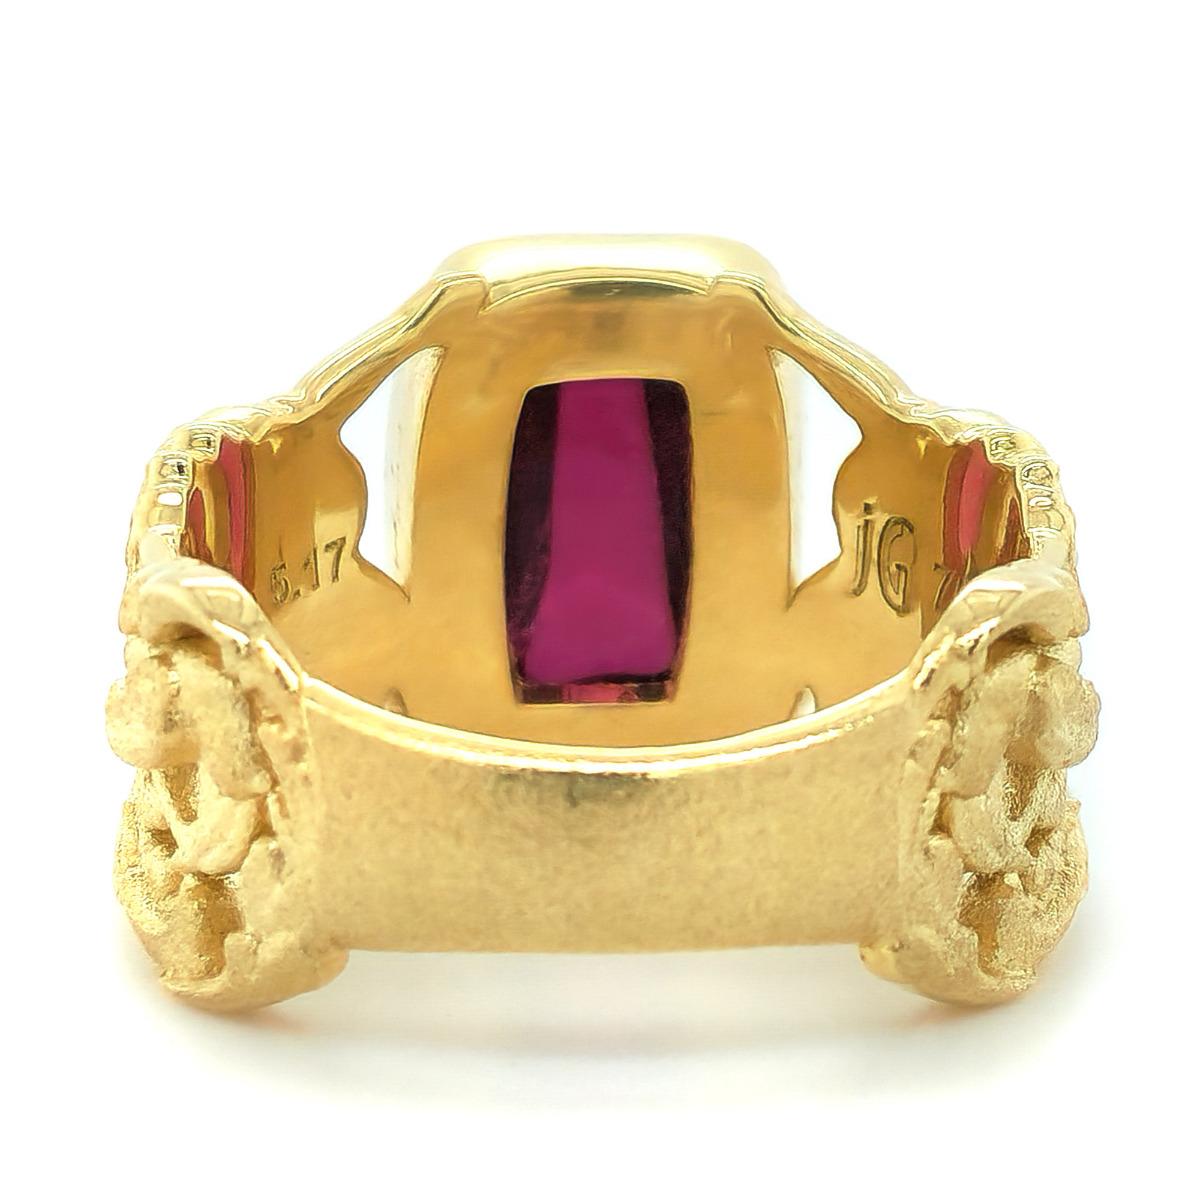 Mixed Cut Certified 5.17 Carat Rubellite Diamonds set in 18K Yellow Gold Ring For Sale